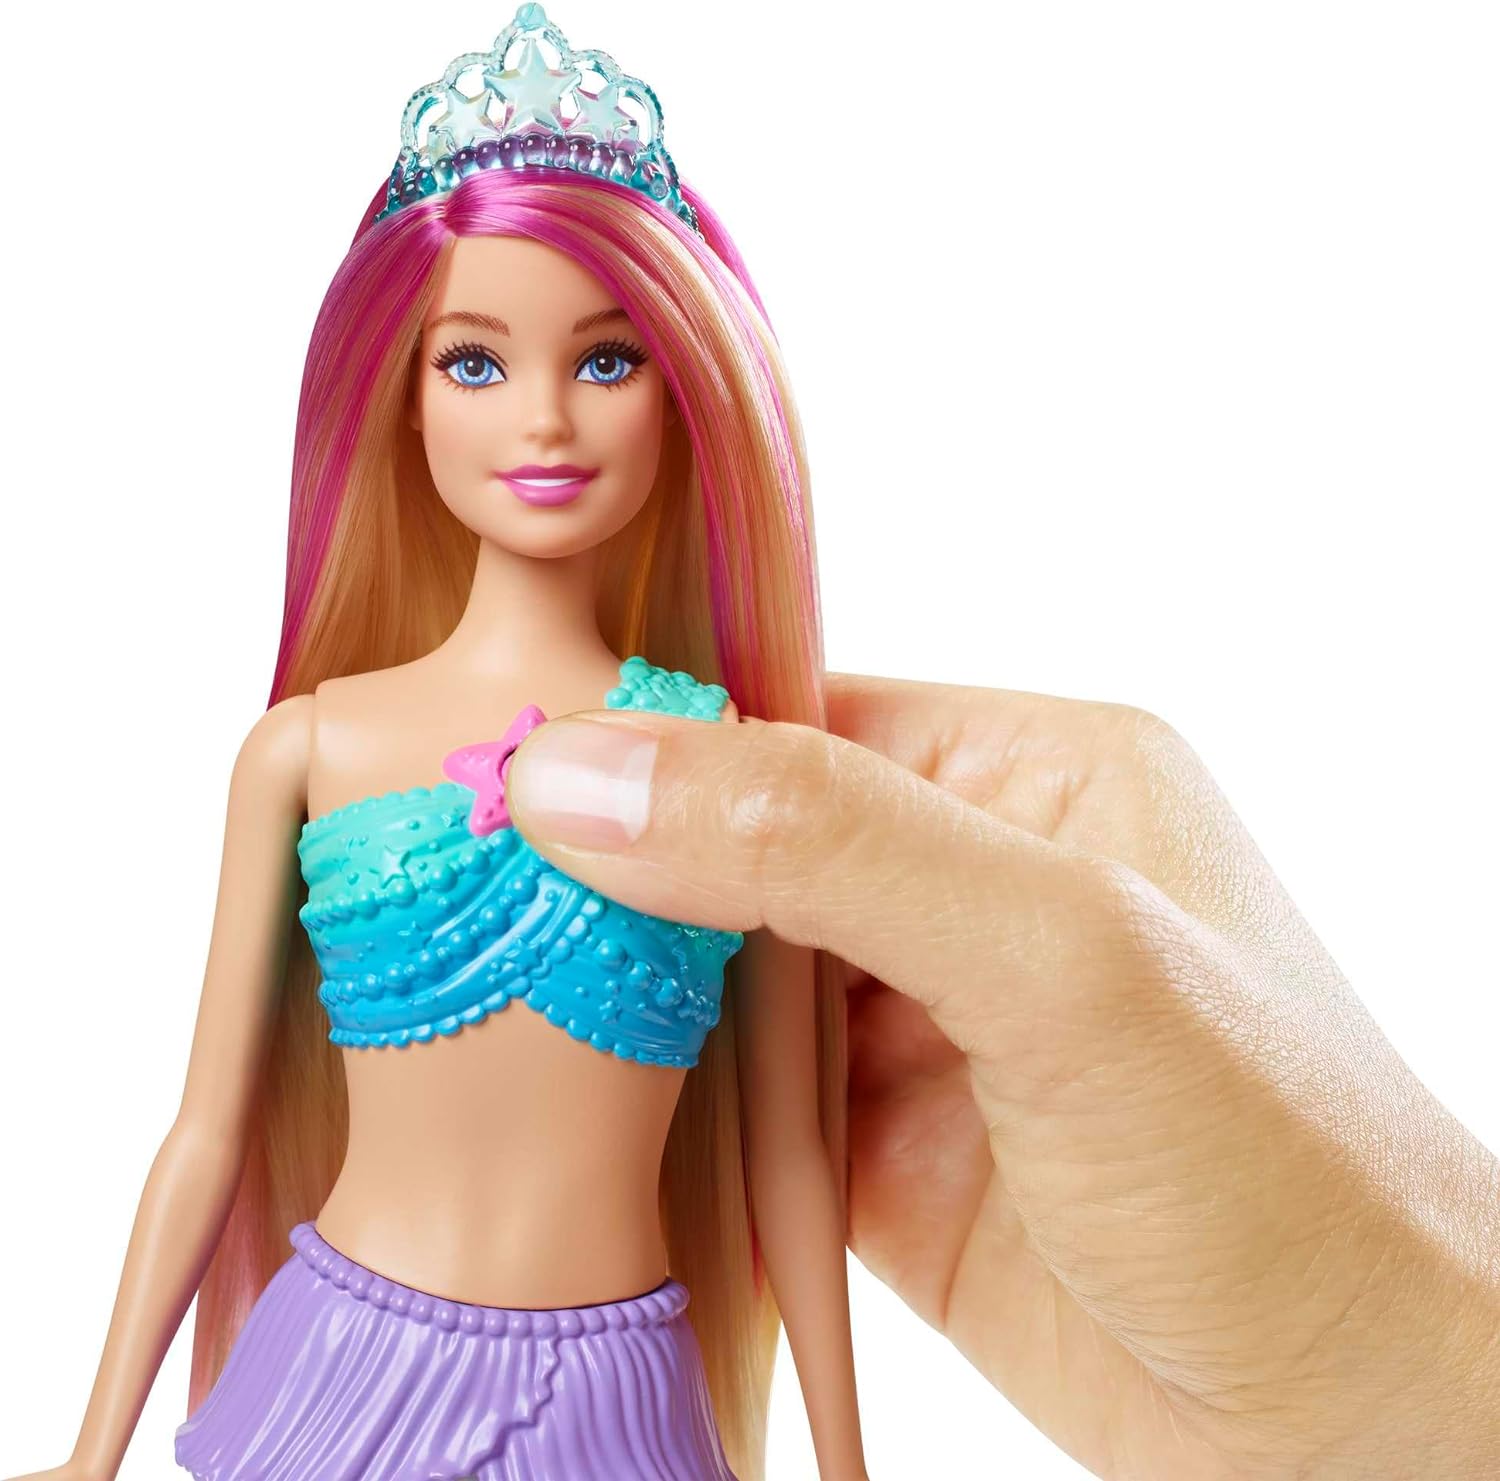 Barbie Mermaid Doll with Water-Activated Twinkle Light-Up Tail, Barbie Dreamtopia Mermaid Toys, Pink-Streaked Hair